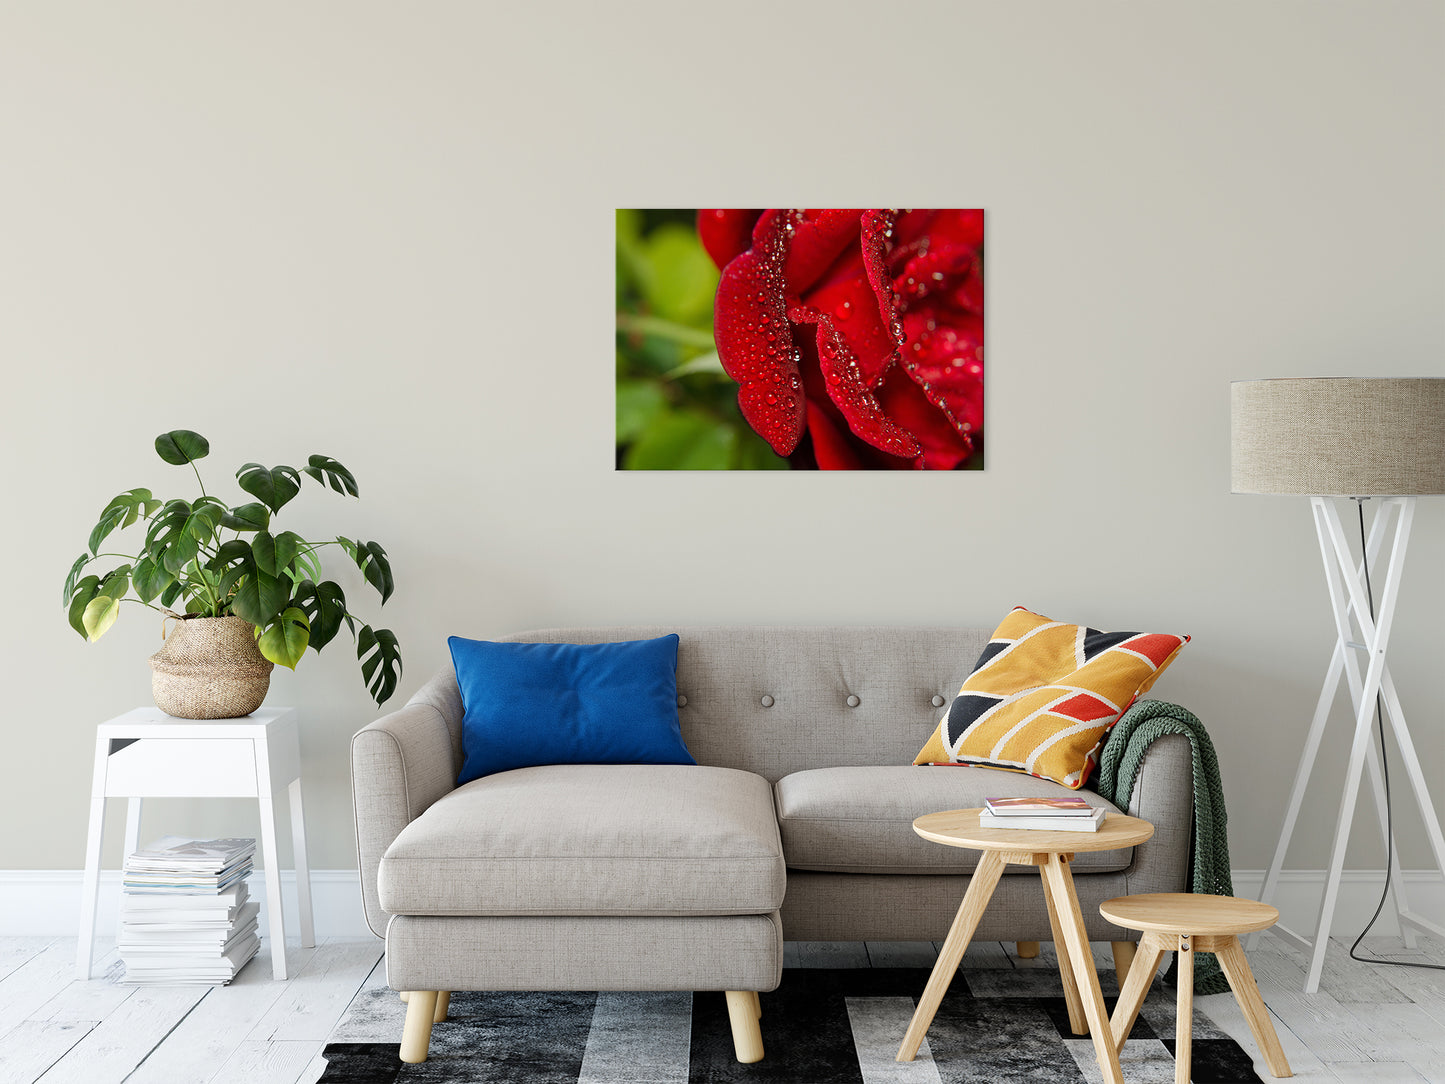 Bold and Beautiful Nature / Floral Photo Fine Art Canvas Wall Art Prints 24" x 36" - PIPAFINEART